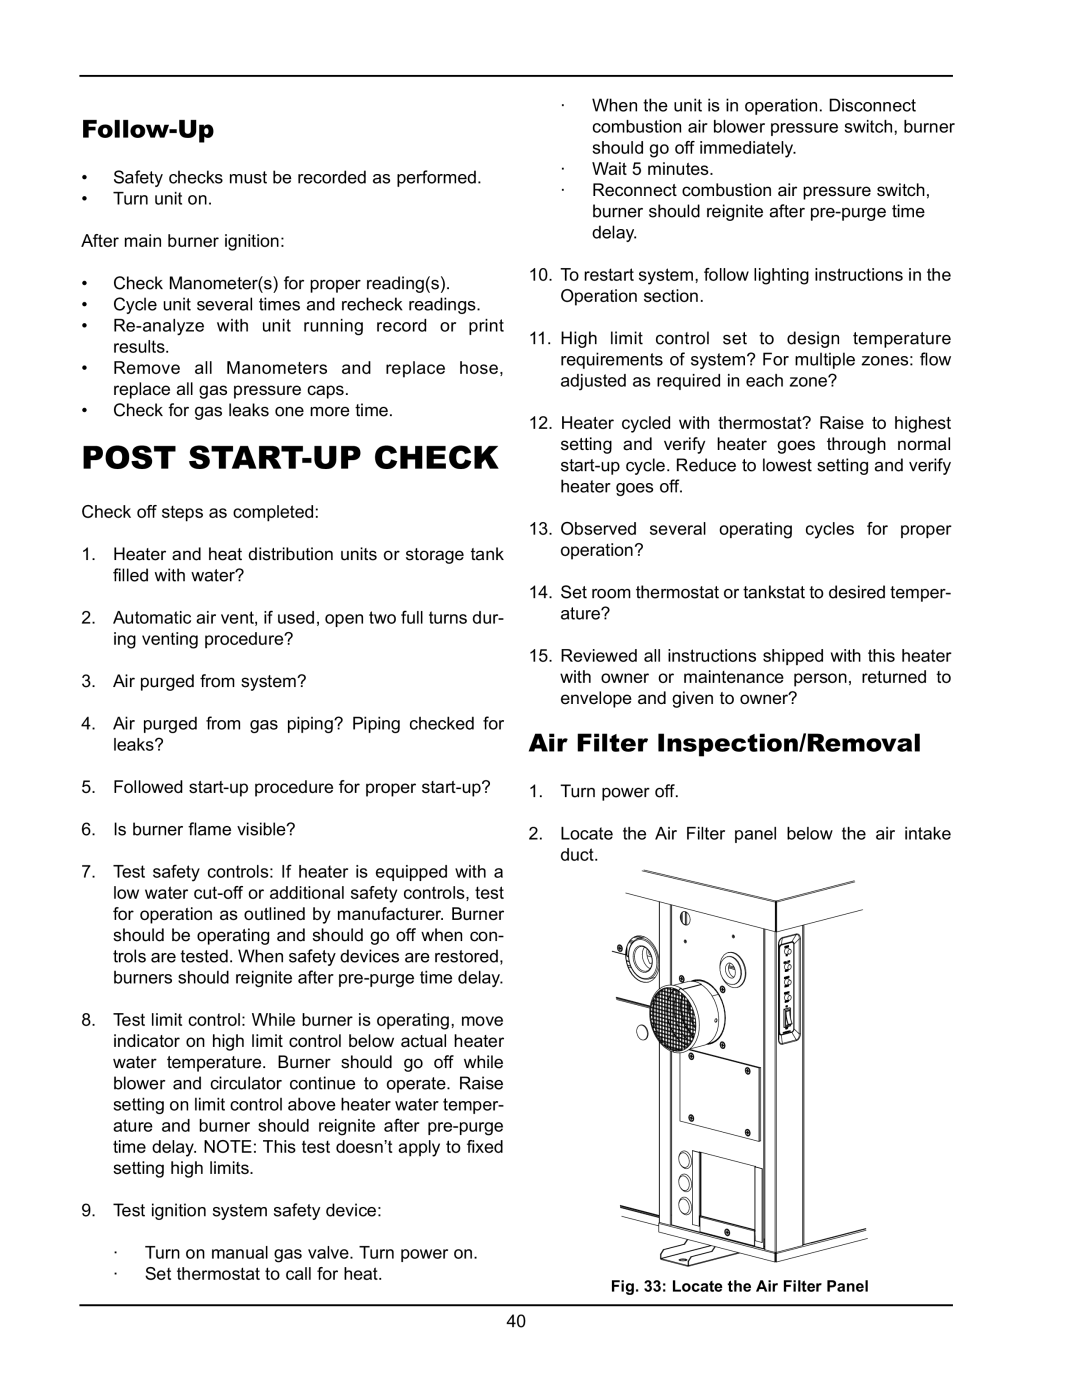 Raypak HD401, HD101 operating instructions Post Start-Upcheck, Follow-Up, Air Filter Inspection/Removal 